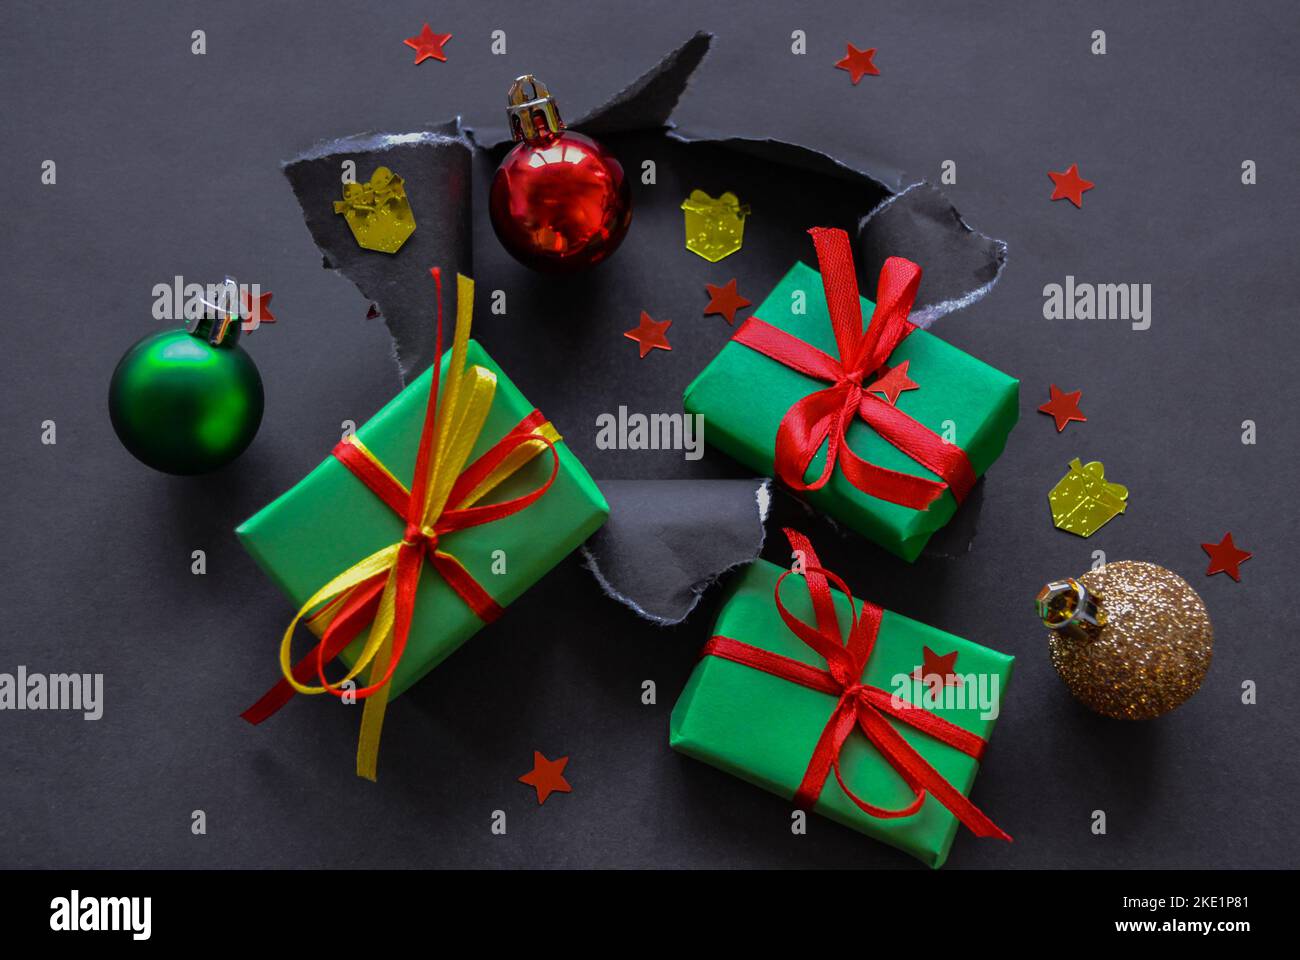 Gifts in green paper with red and yellow ribbons, christmas balls and confetti in the form of red stars and gold presents fall out a torn hole in the Stock Photo